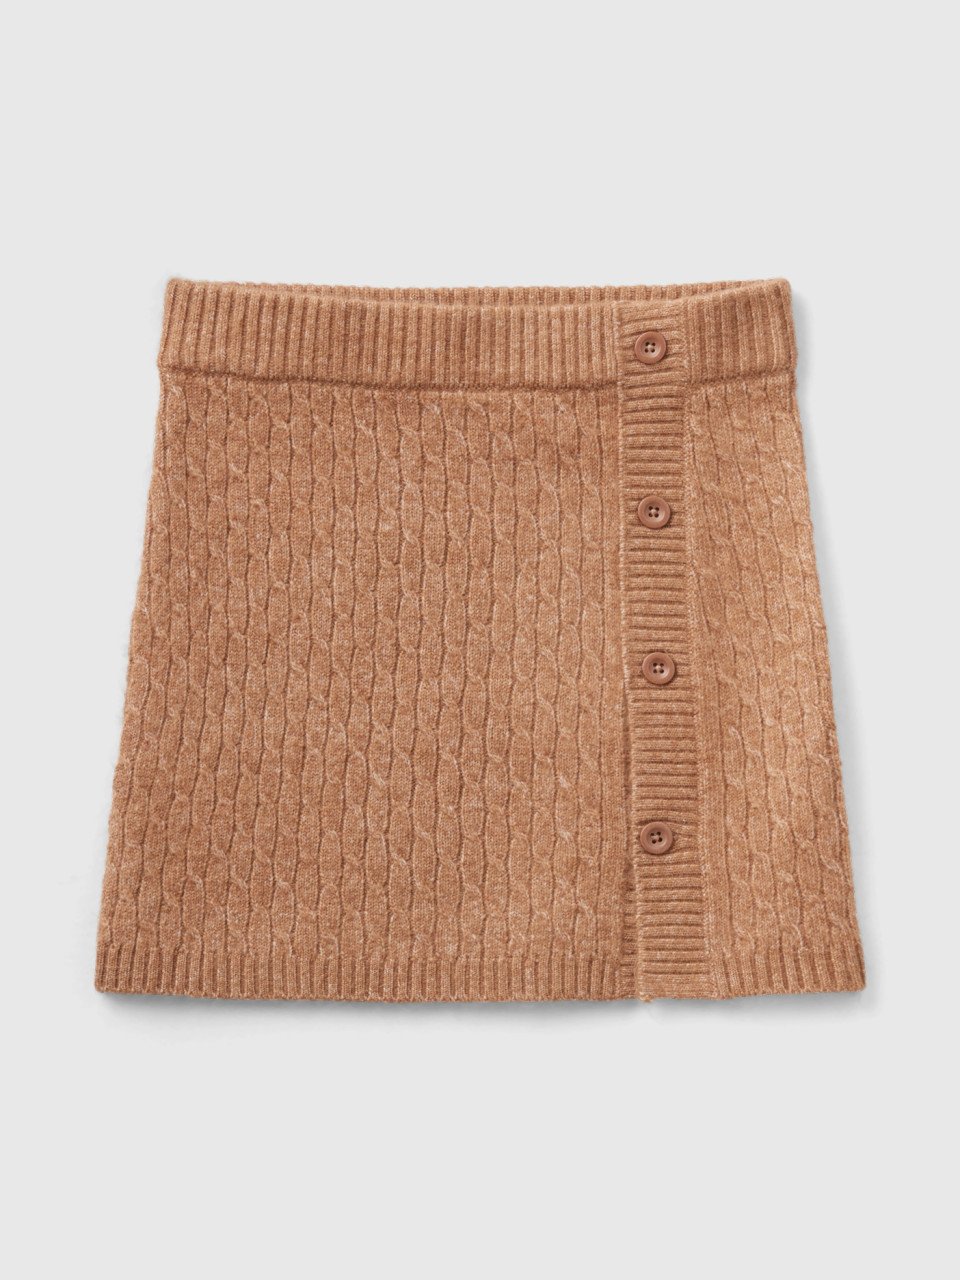 Benetton, Sweater With Cables, Camel, Kids